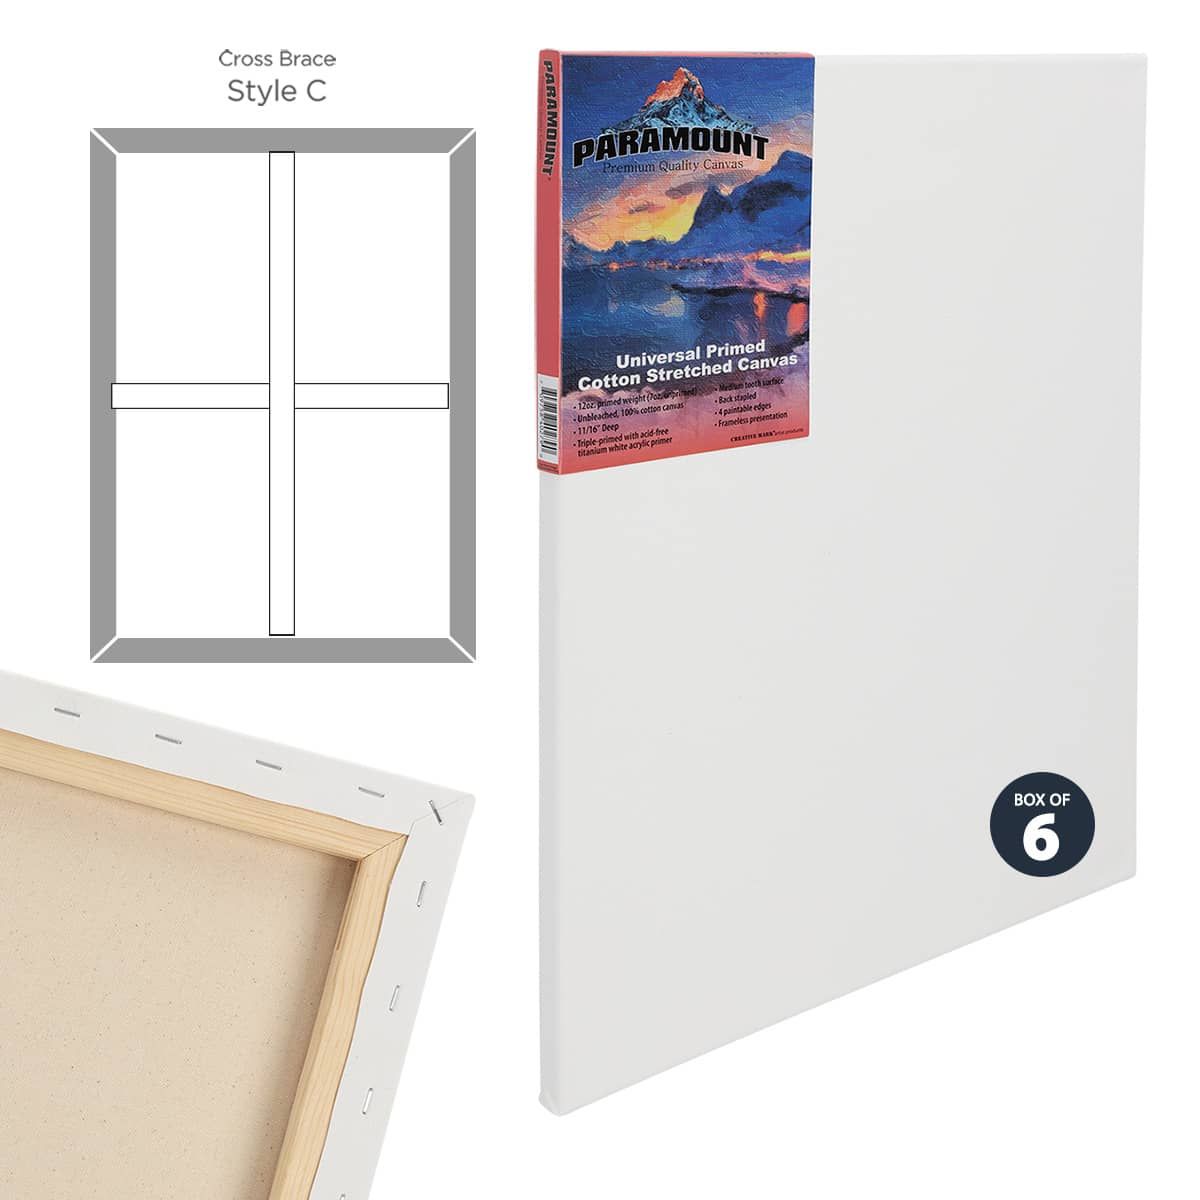 Paramount PRO Cotton 24 x 36 Stretched Canvas, 11/16 Deep (Box of 6)